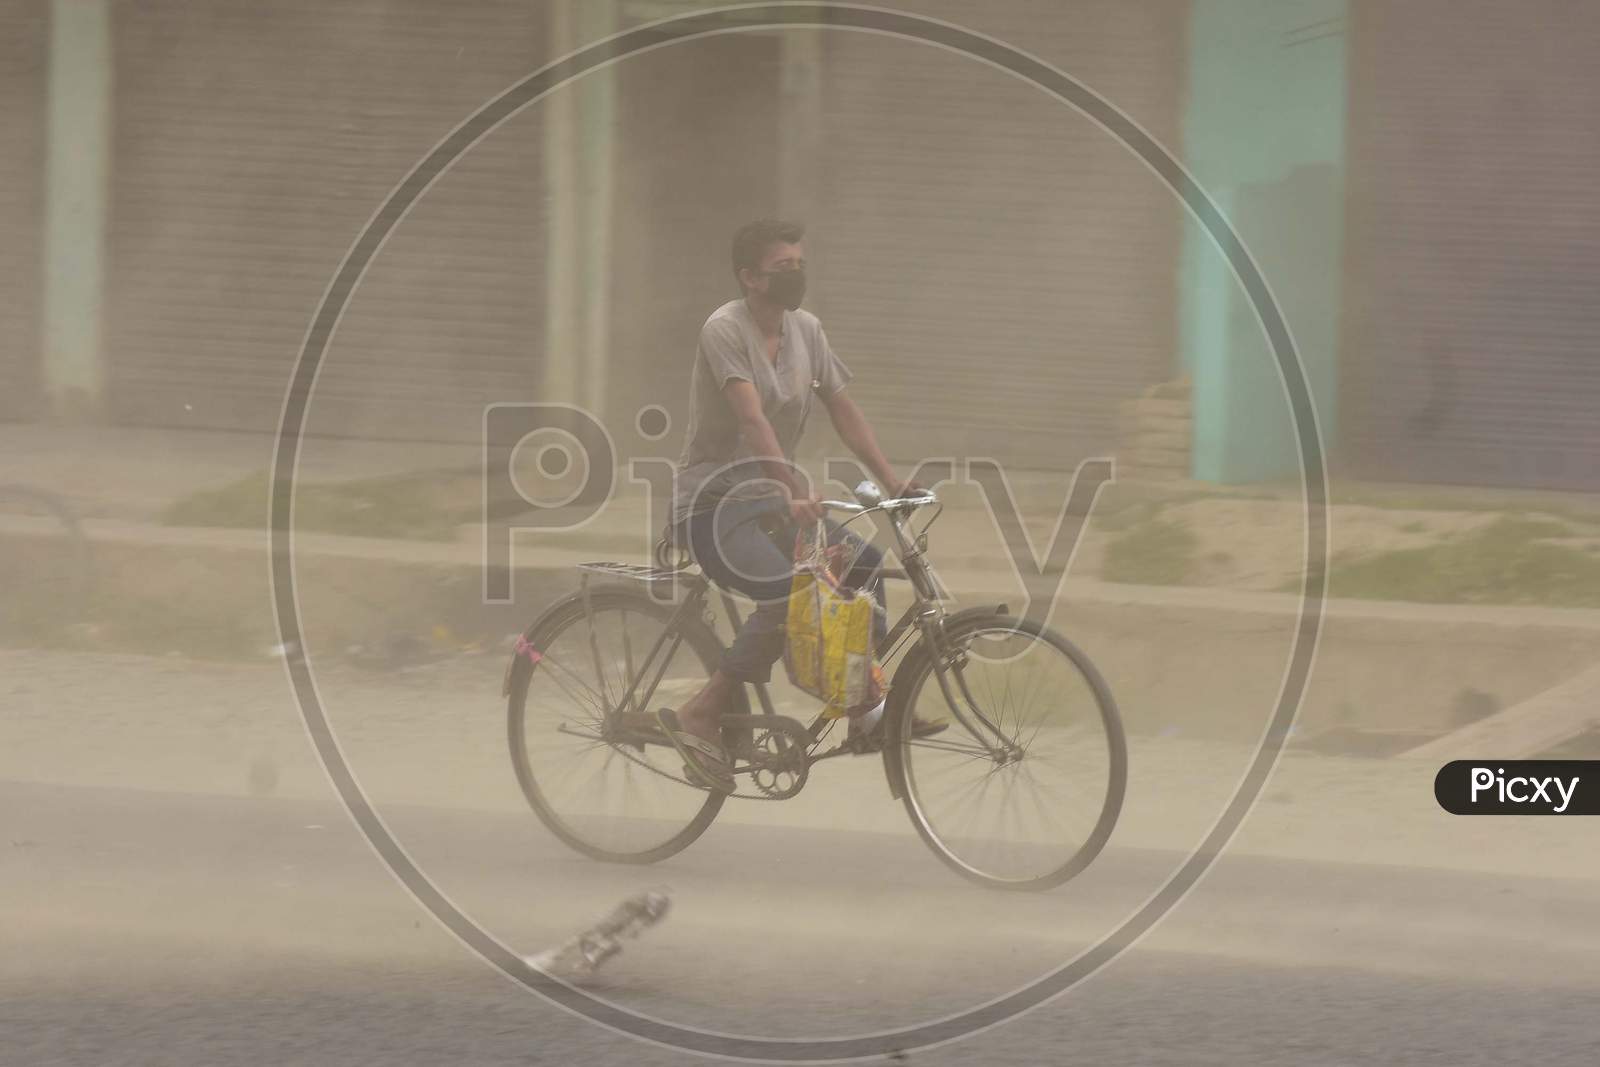 A Man Rides A Bicycle During Massive Dust Storm  During A Nationwide Lockdown In The Wake Of Corona virus or COVID-19  Pandemic, In Nagaon District Of Assam On April 15,2020.